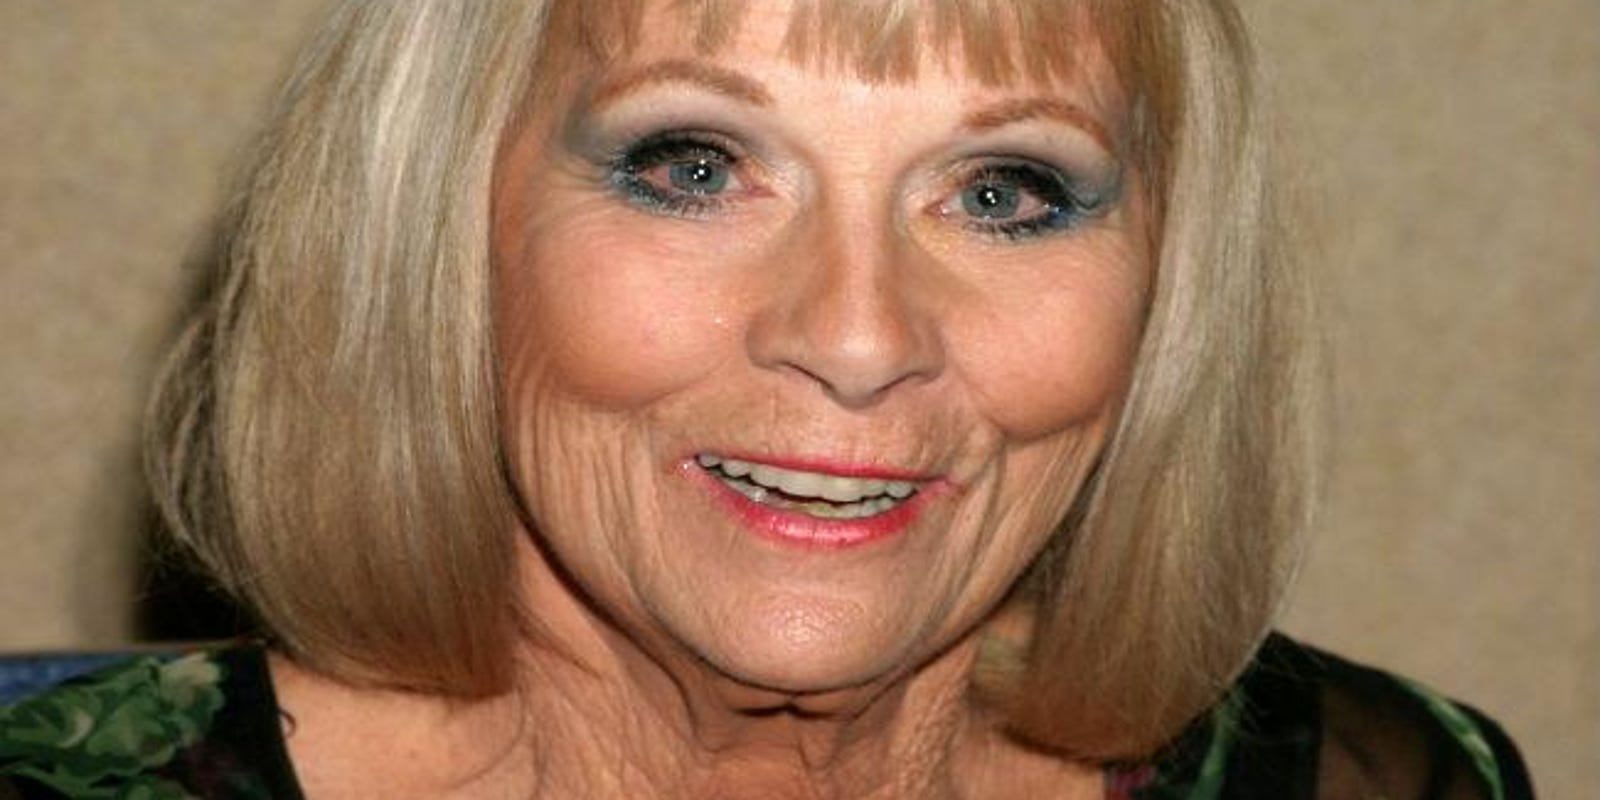 Hungarian Babes Vanessa Y Porn - Star Trek' actress Grace Lee Whitney dead at 85